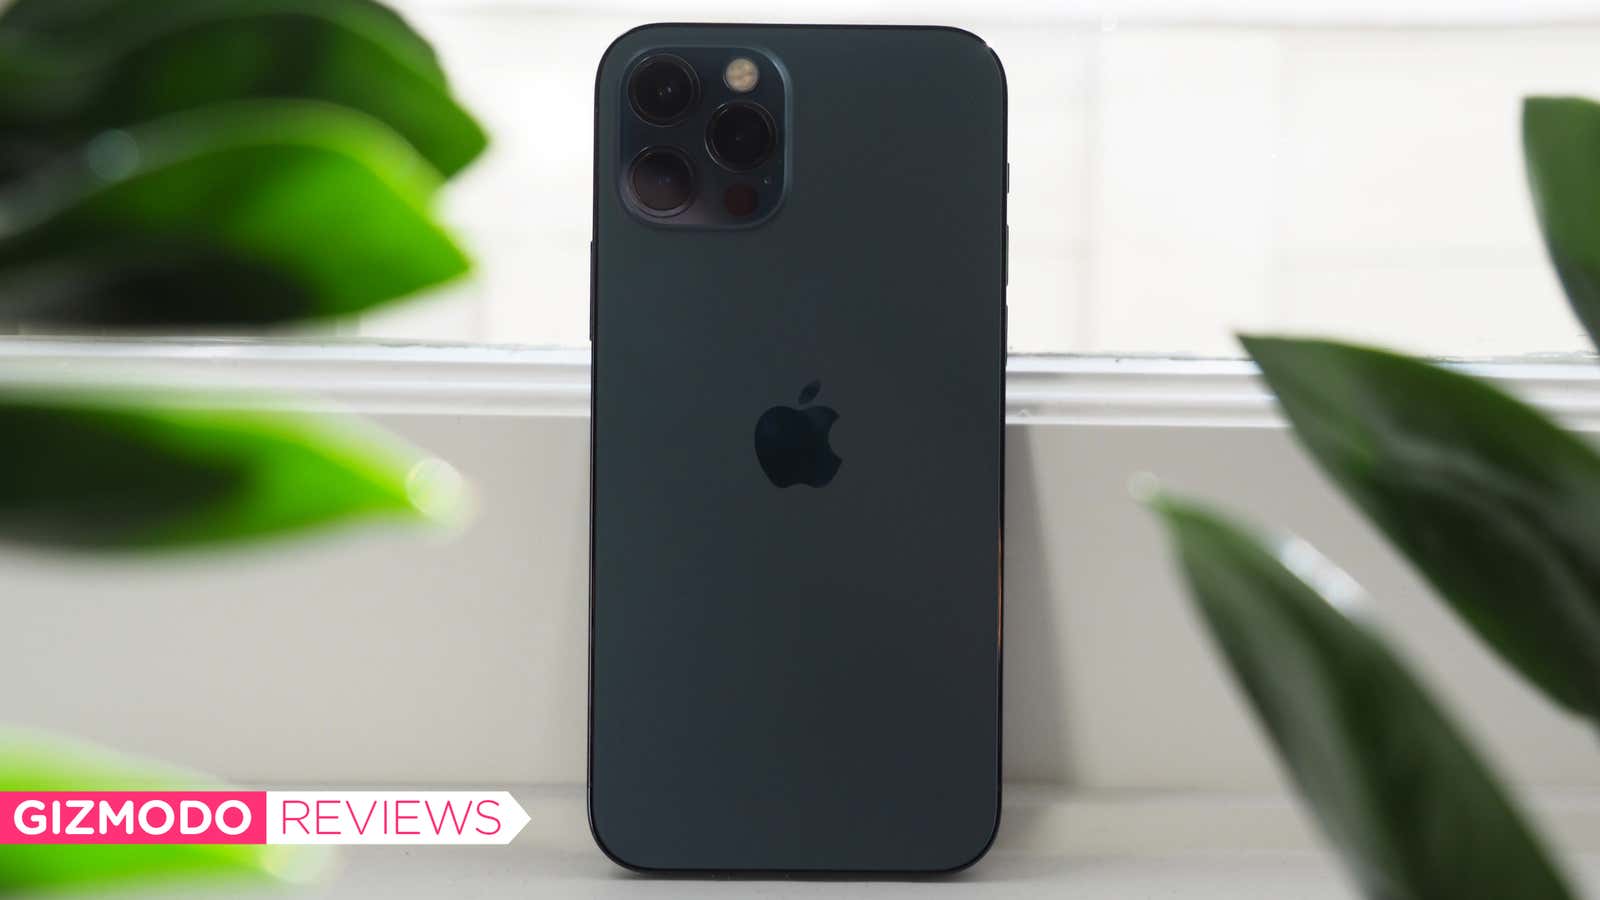 Apple iPhone 11 Pro Cameras Are Worth the Price of Admission: REVIEW